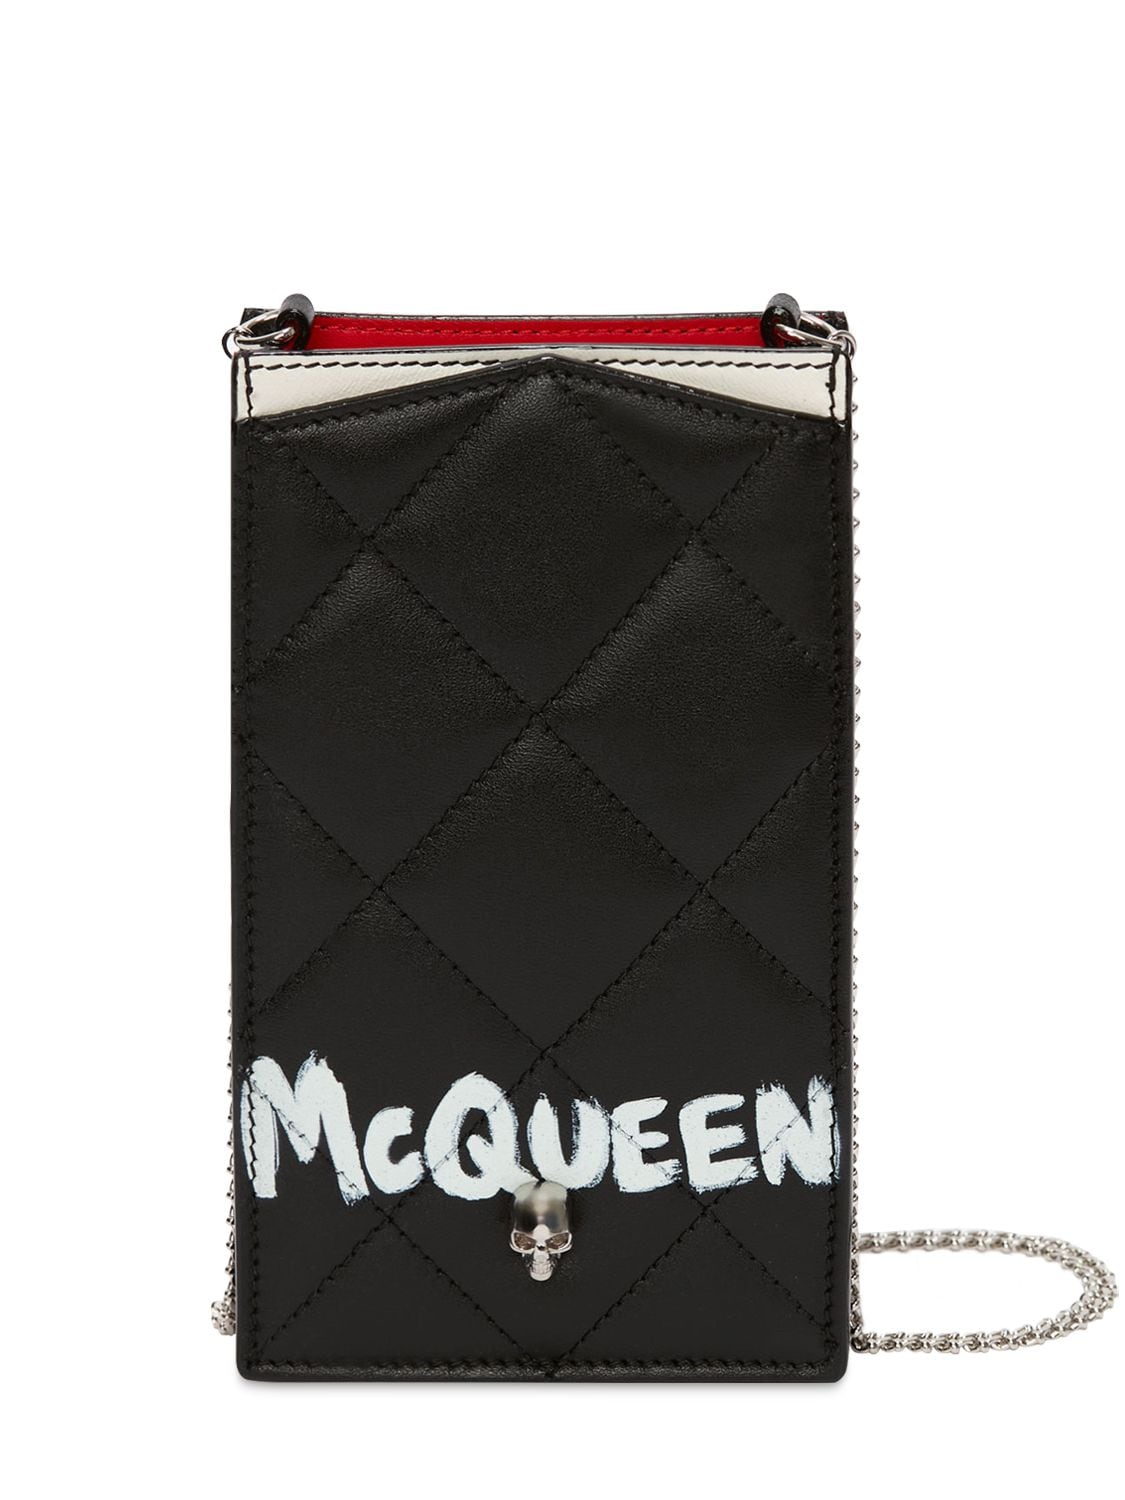 ALEXANDER MCQUEEN QUILTED LEATHER PHONE CASE W/ CHAIN,74IRL6018-MTA5NQ2